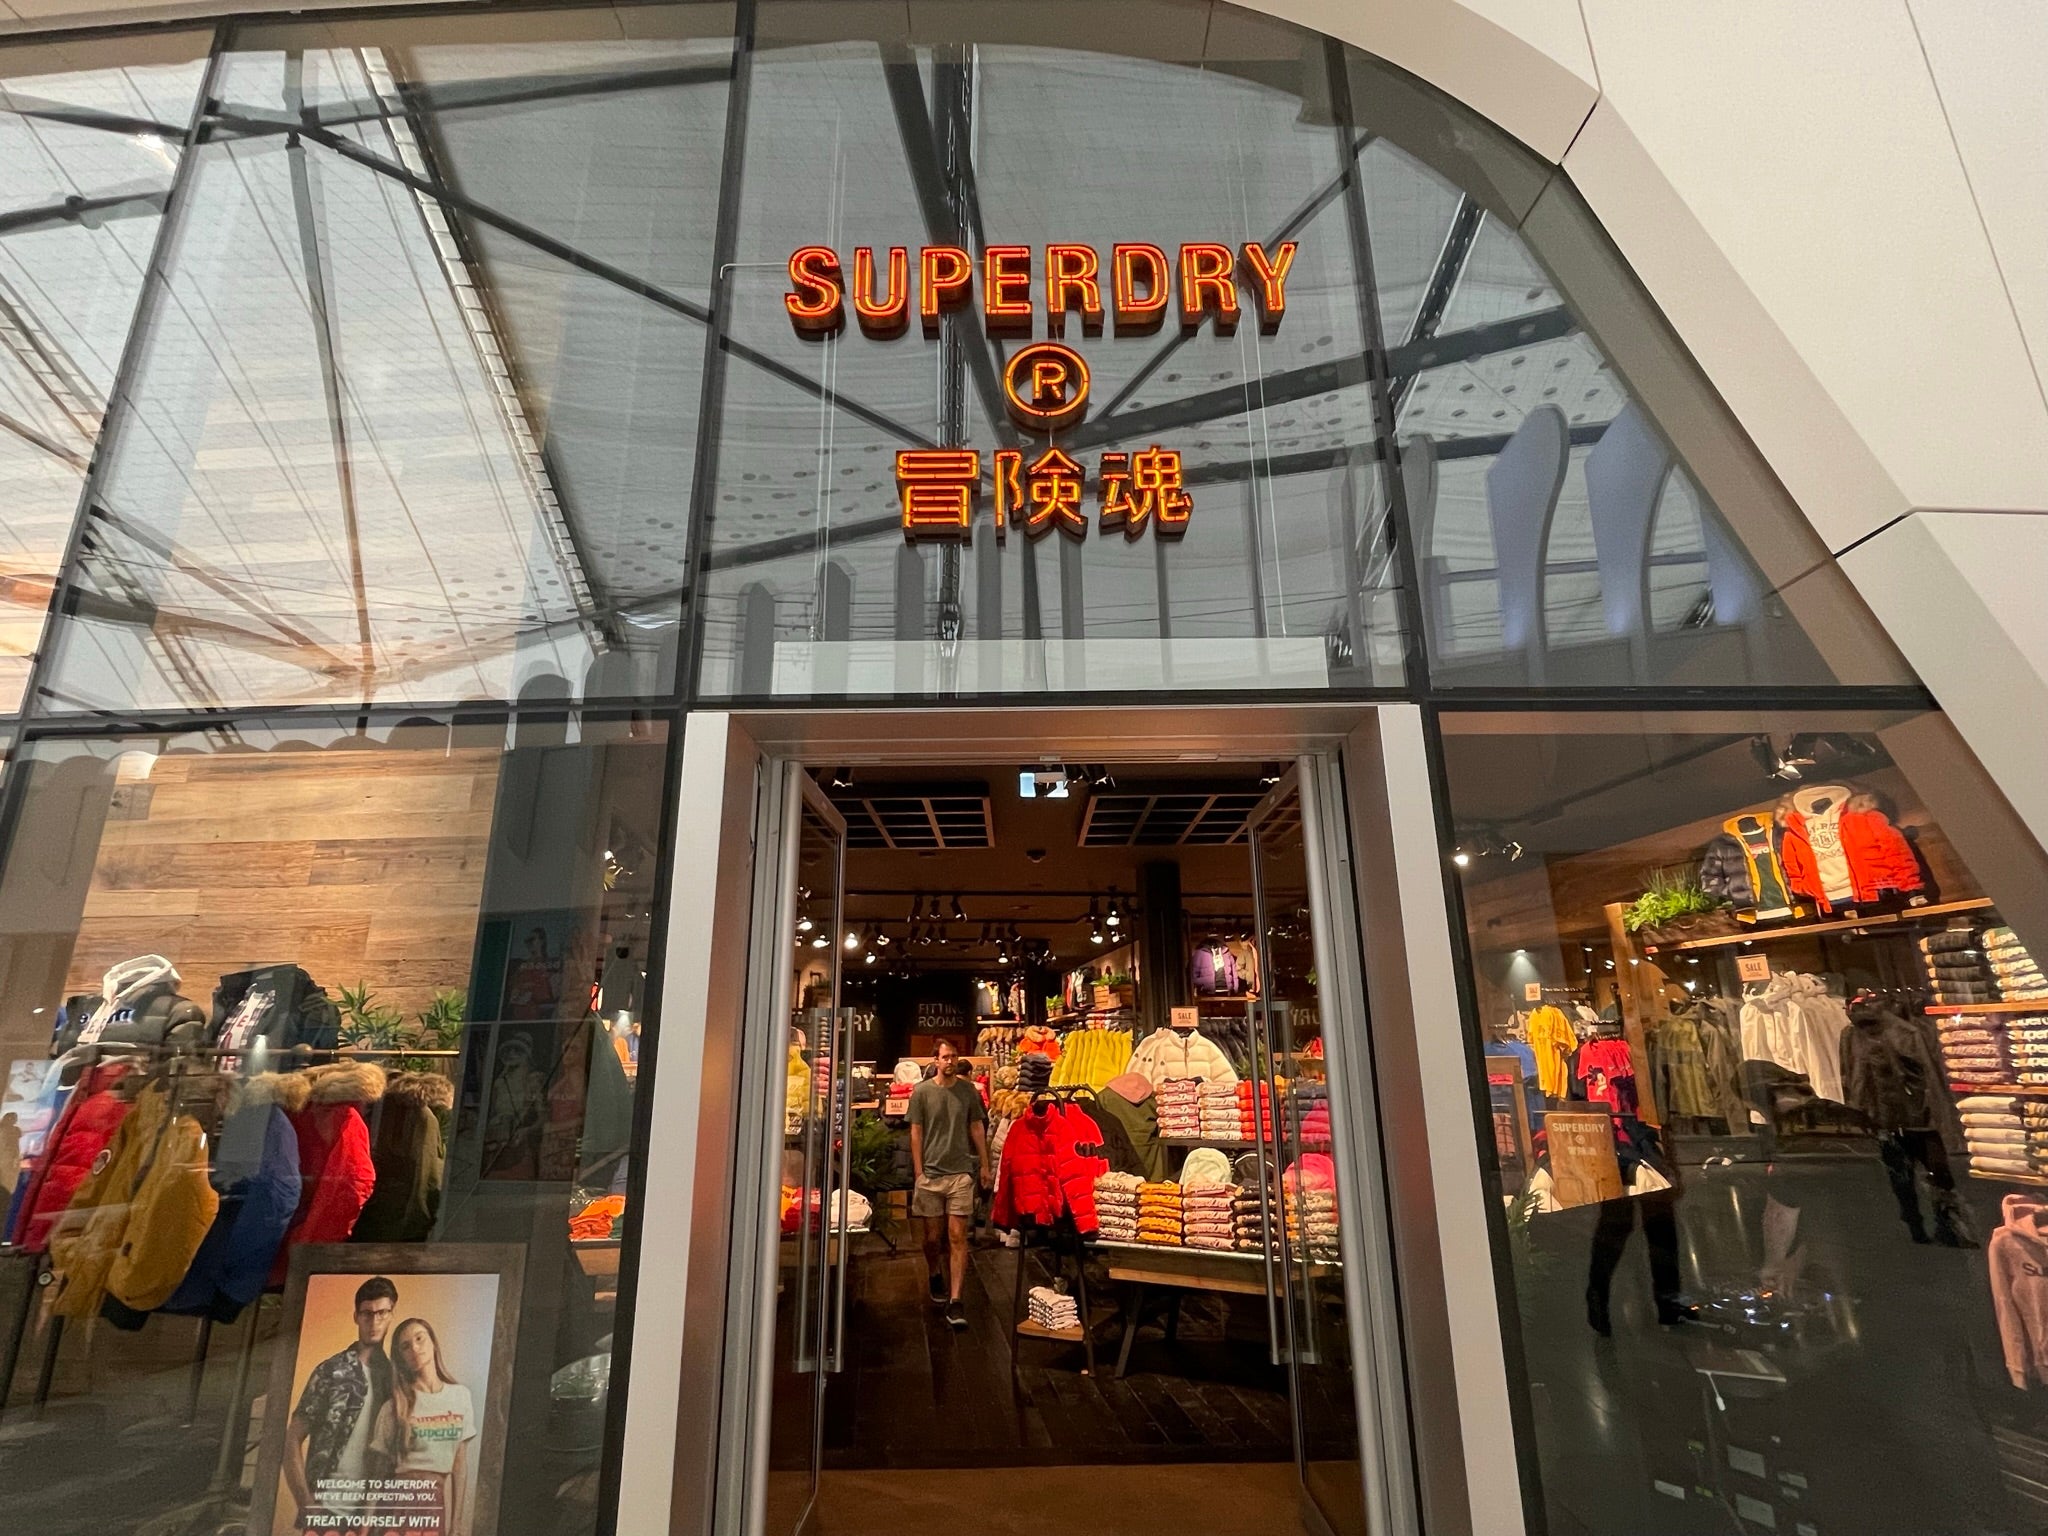 https://www.theo2.co.uk/assets/img/Superdry-at-Icon-Outlet-3-b3158a9b37.jpeg